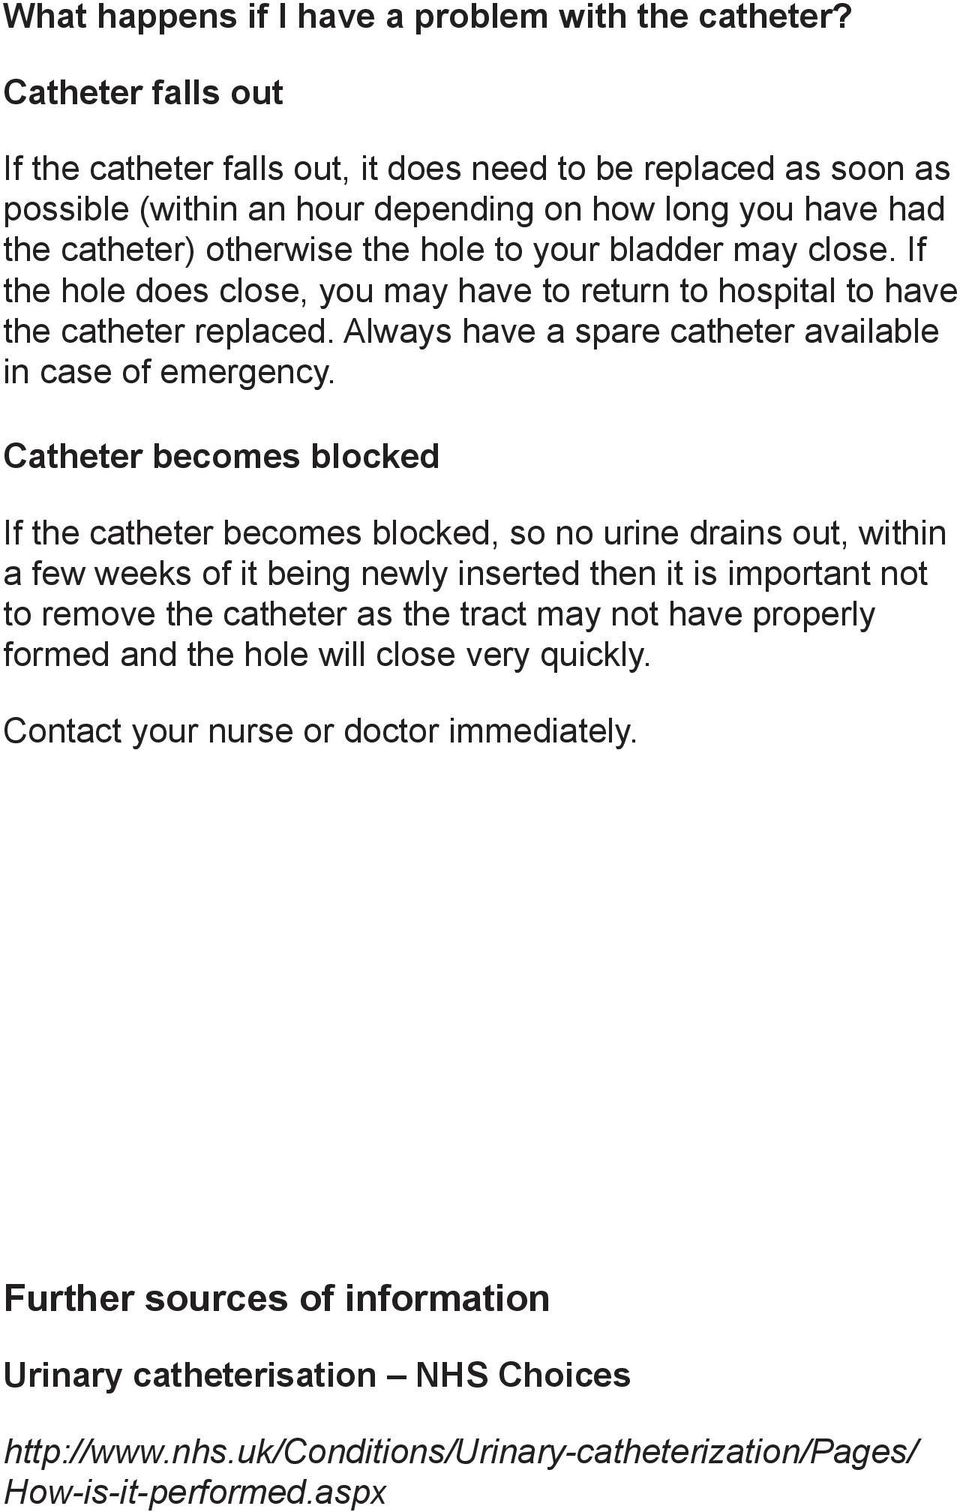 close. If the hole does close, you may have to return to hospital to have the catheter replaced. Always have a spare catheter available in case of emergency.